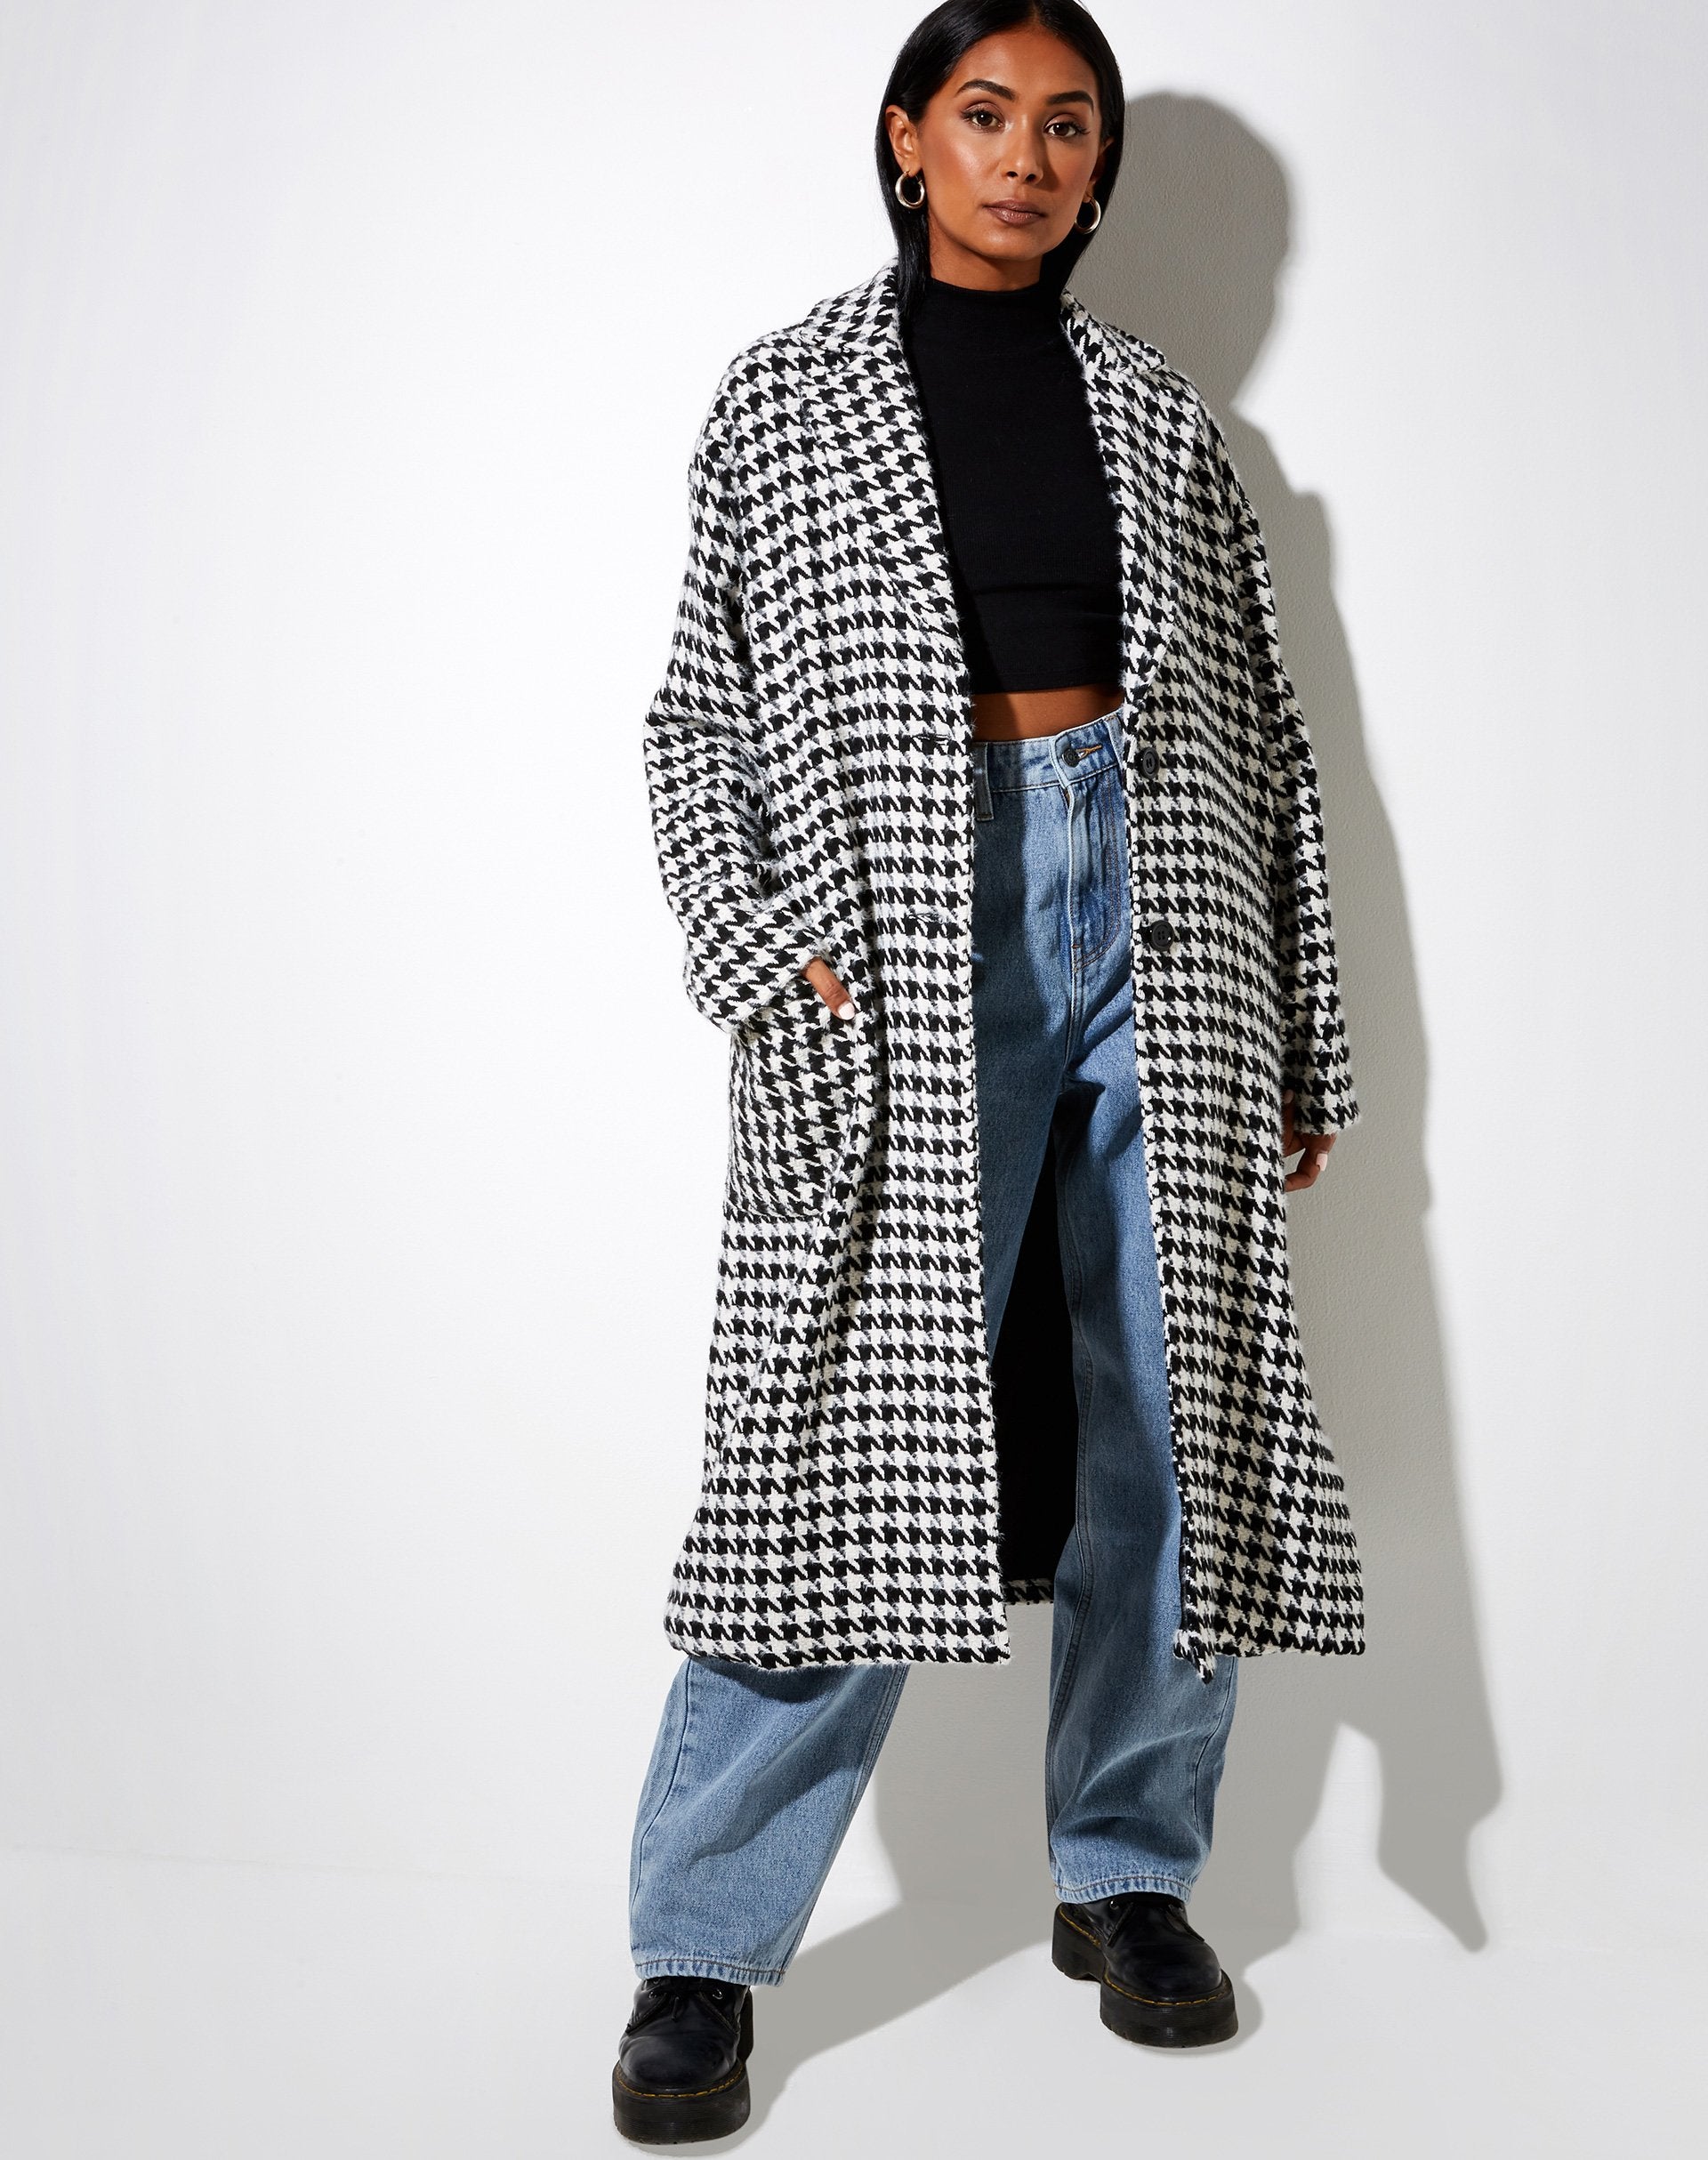 Image of Duster Coat in Houndstooth Black and White